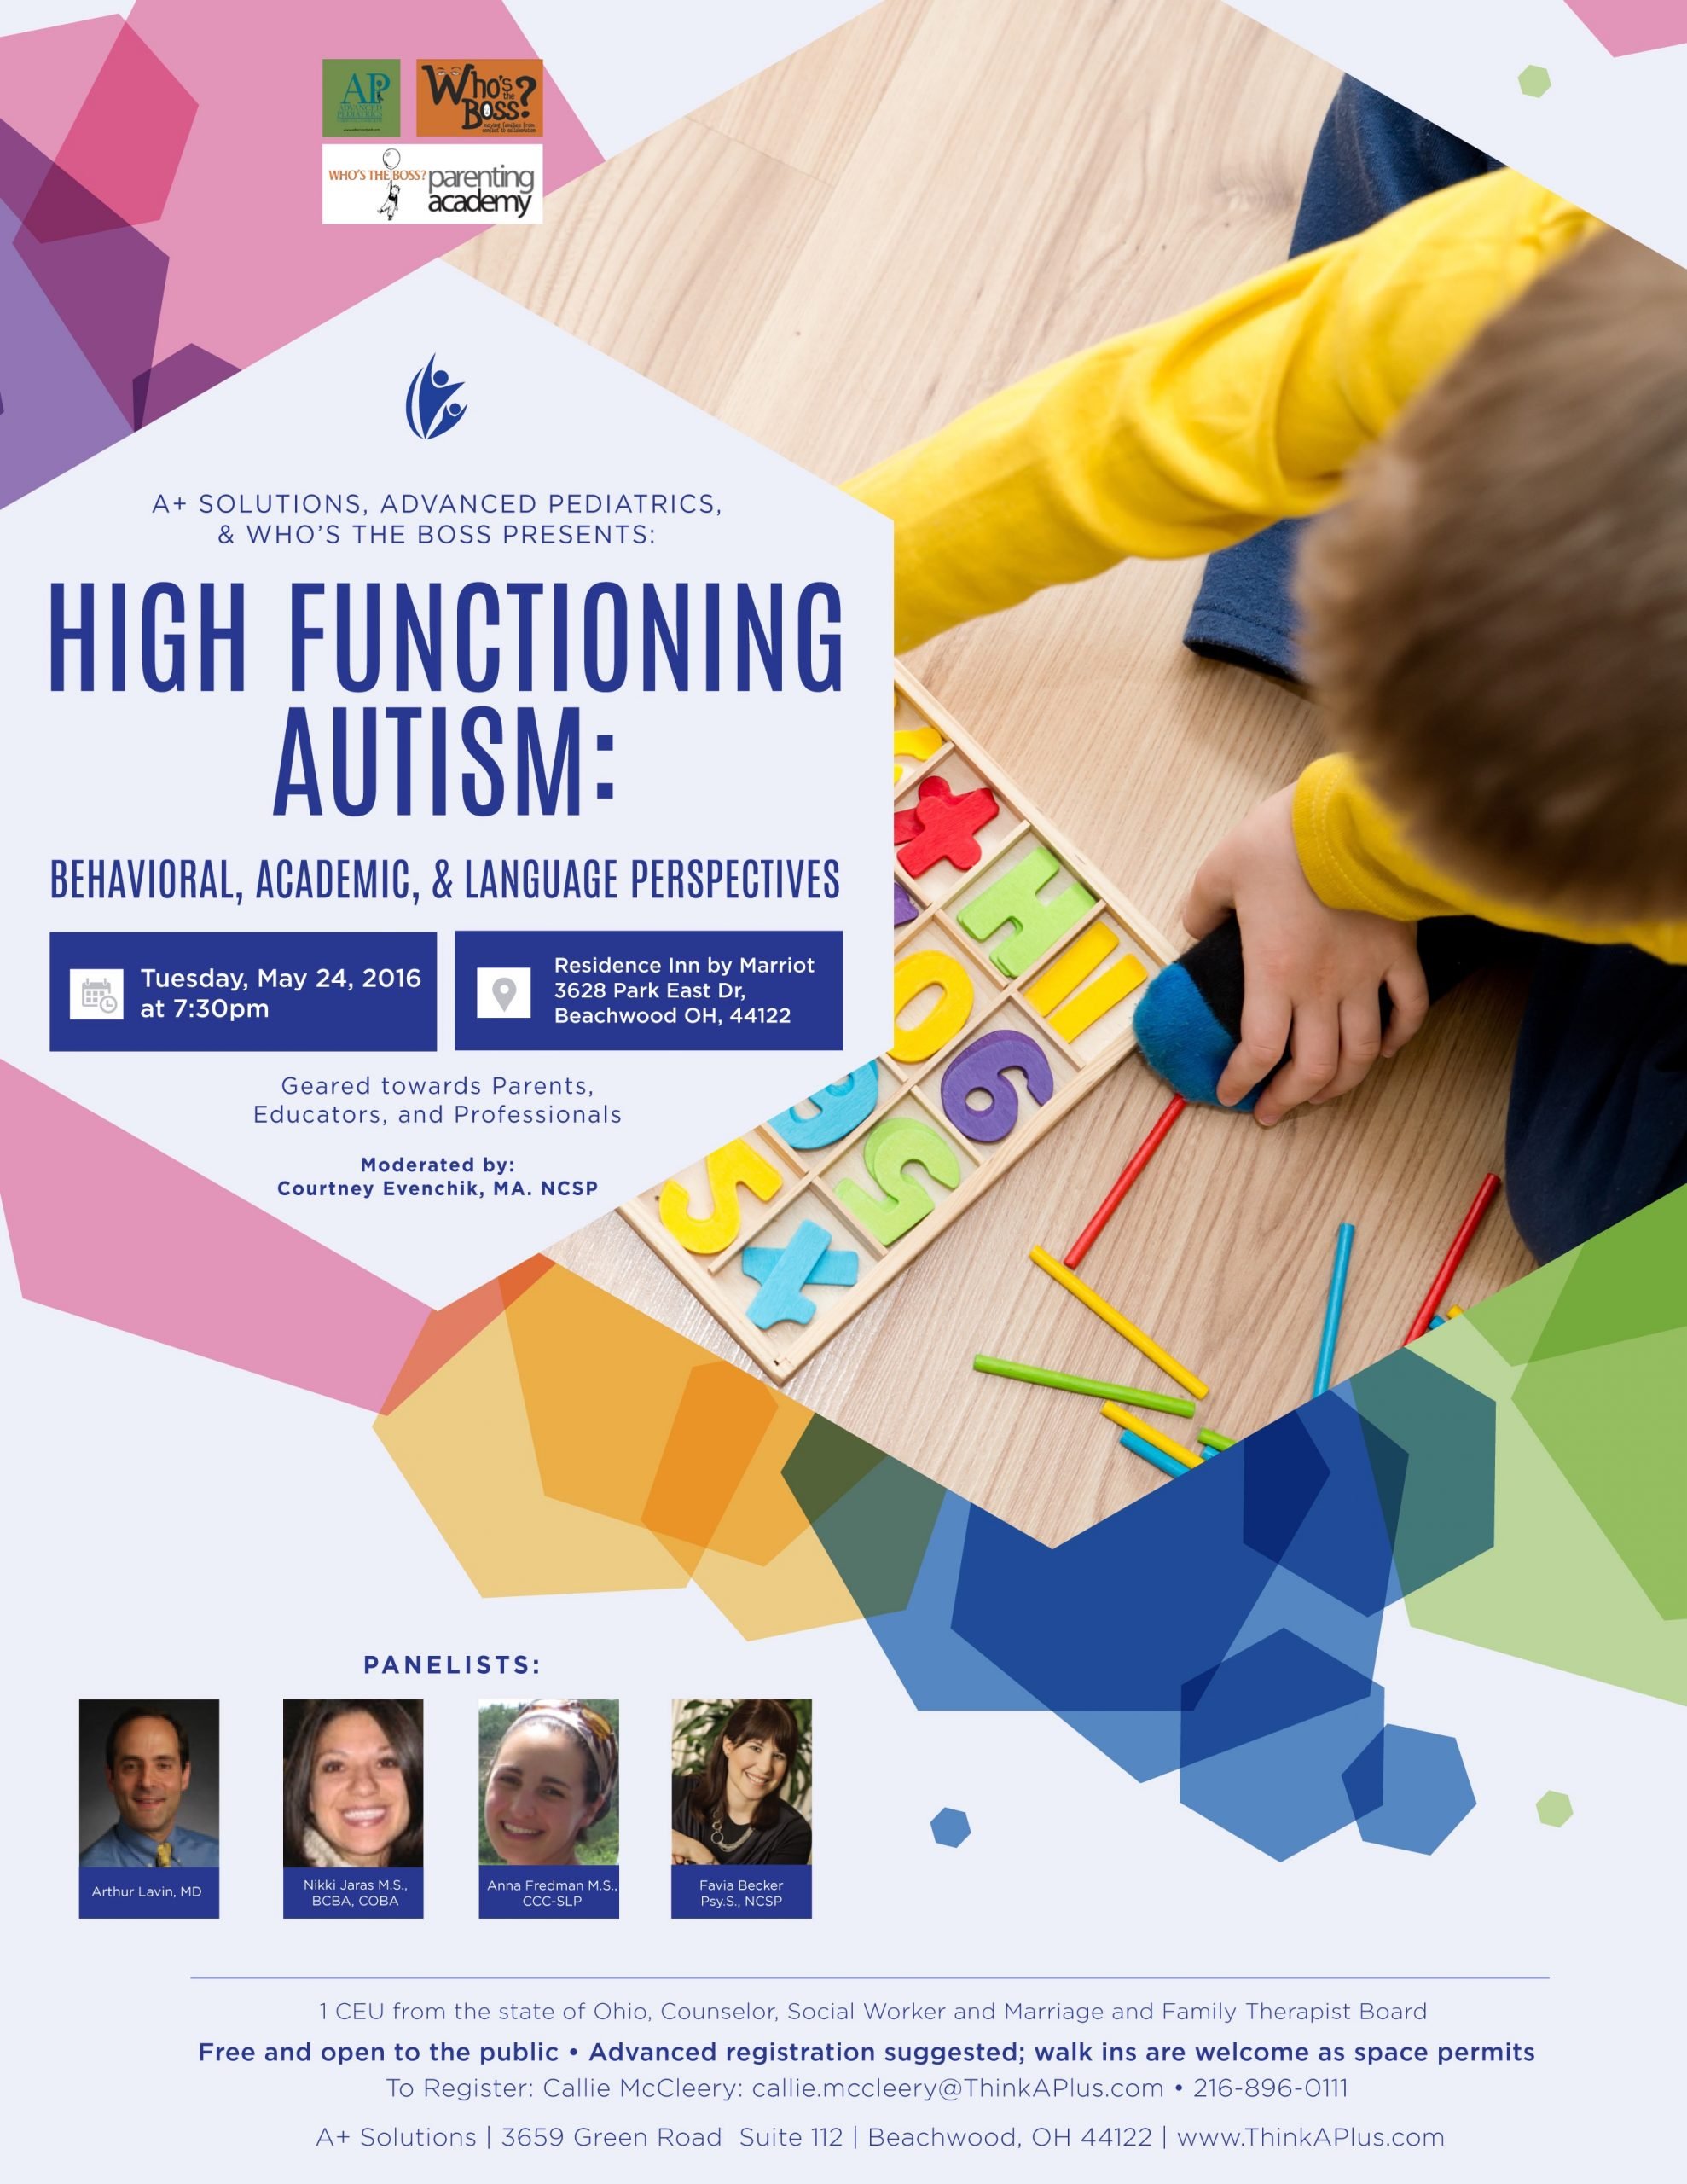 High Functioning Autism: Meet Our Panelists